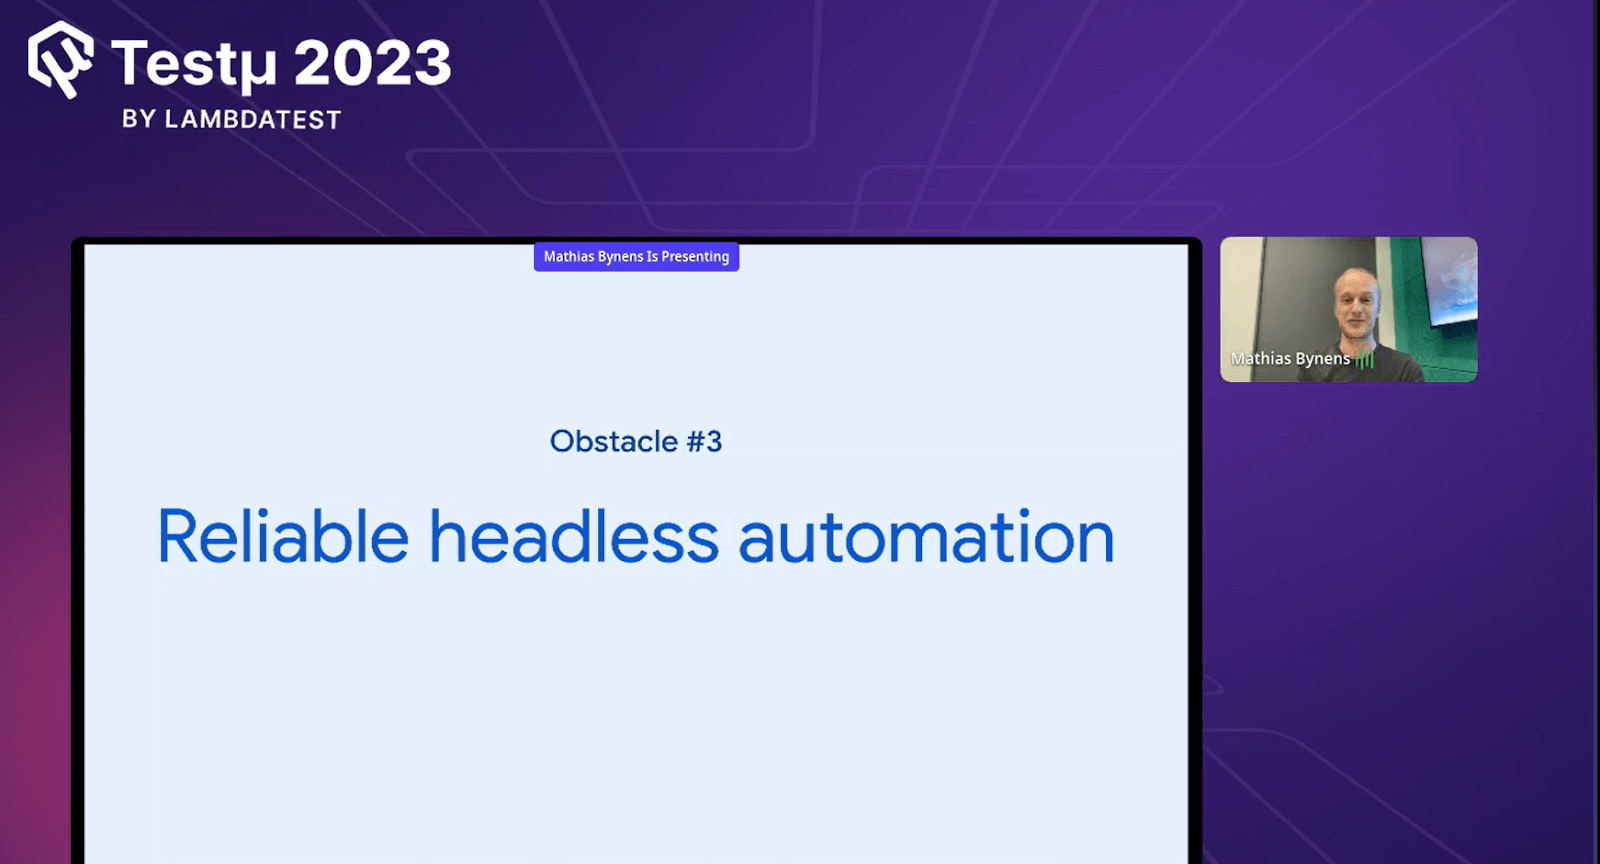 Reliable headless automation